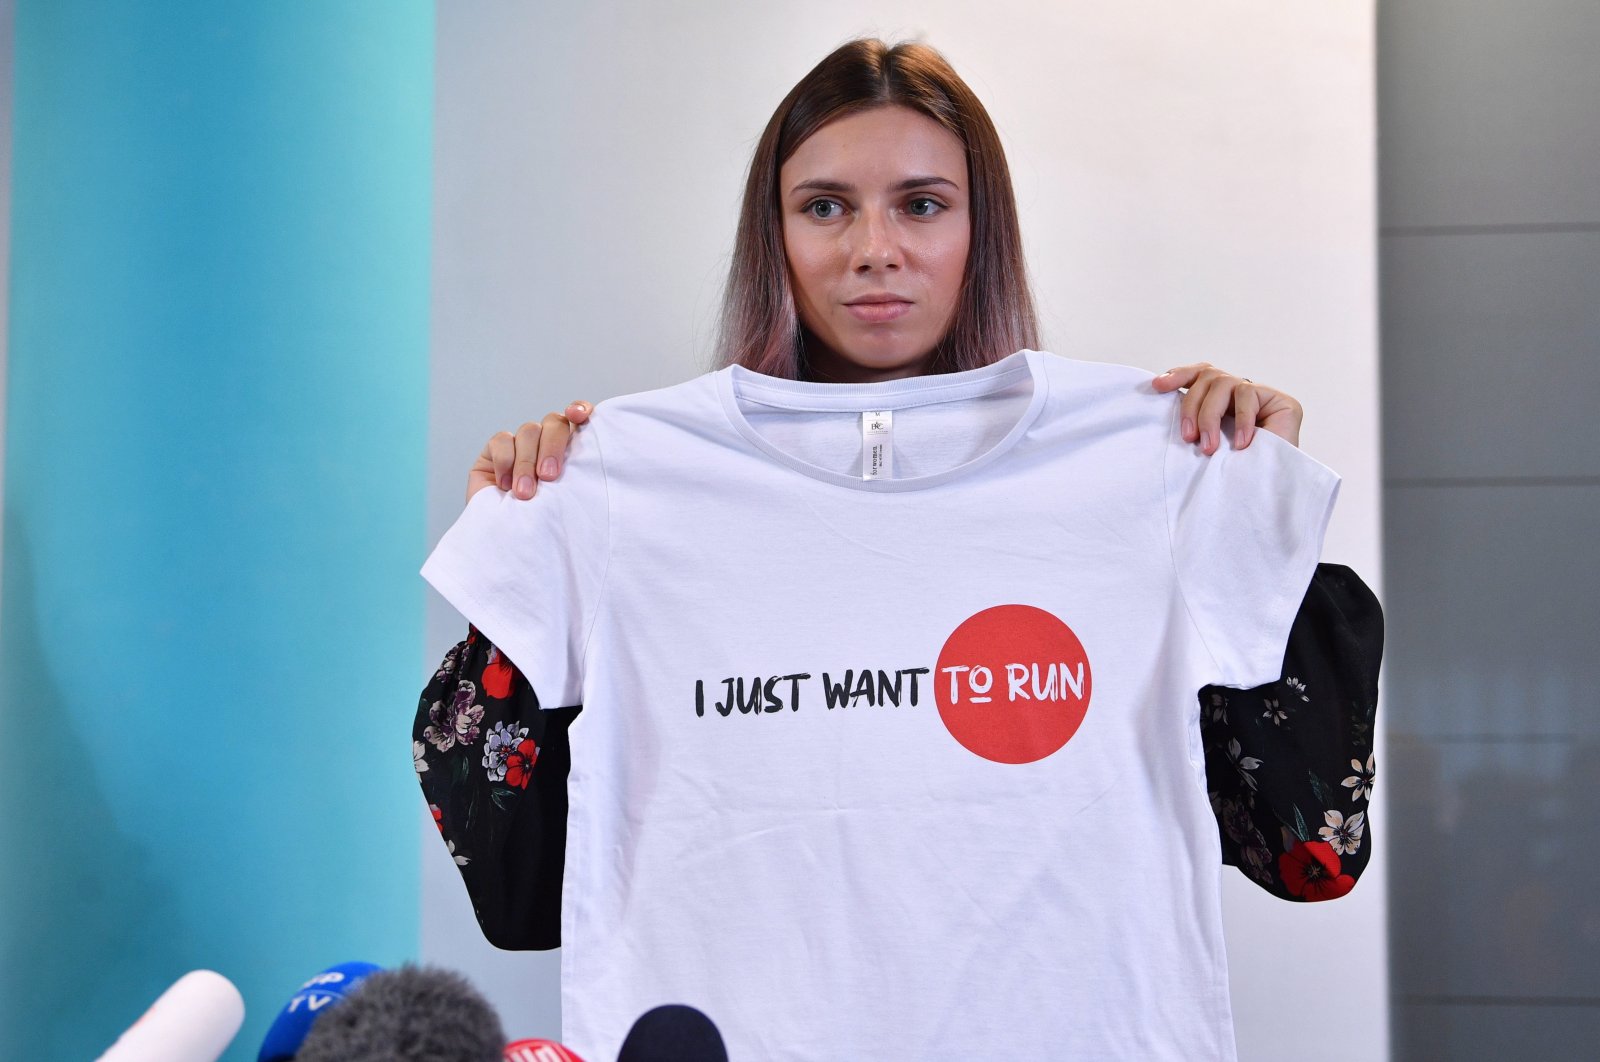 Belarusian sprinter Krystsina Tsimanouskaya, who left the Olympic Games in Tokyo and seeks asylum in Poland, holds a t-shirt at a news conference in Warsaw, Poland, Aug. 5, 2021. (Reuters Photo)